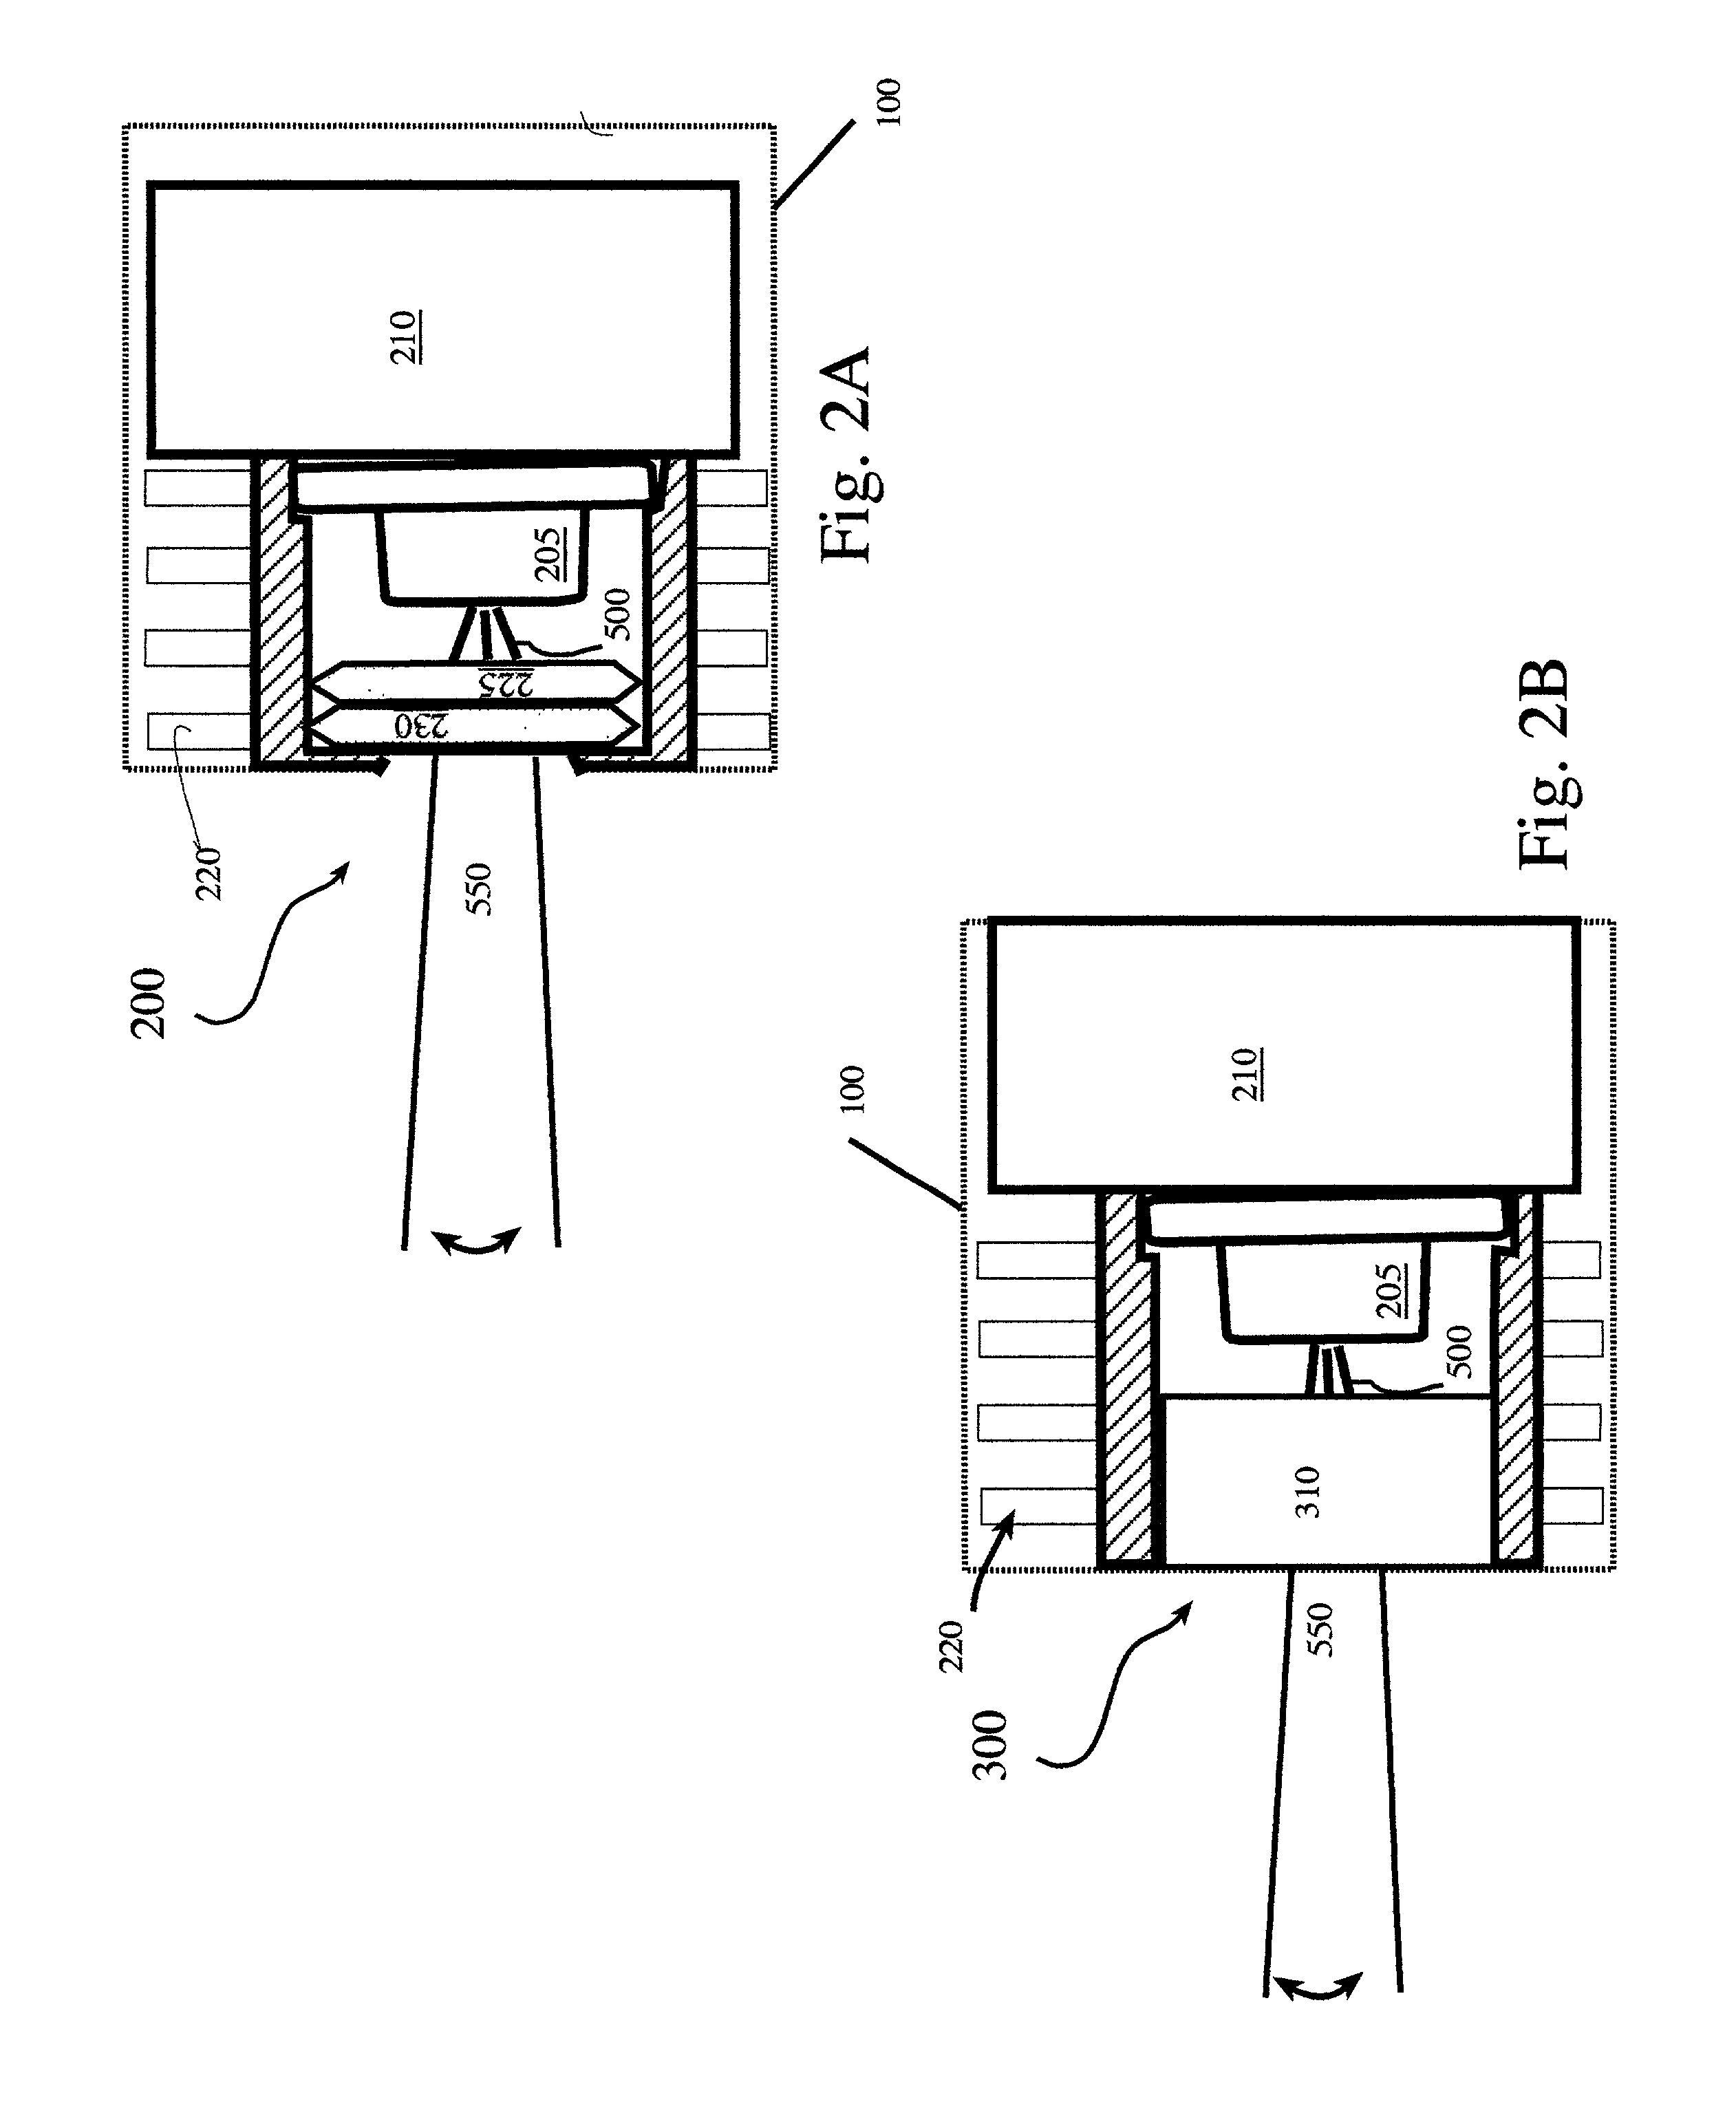 Variable output laser illuminator and targeting device